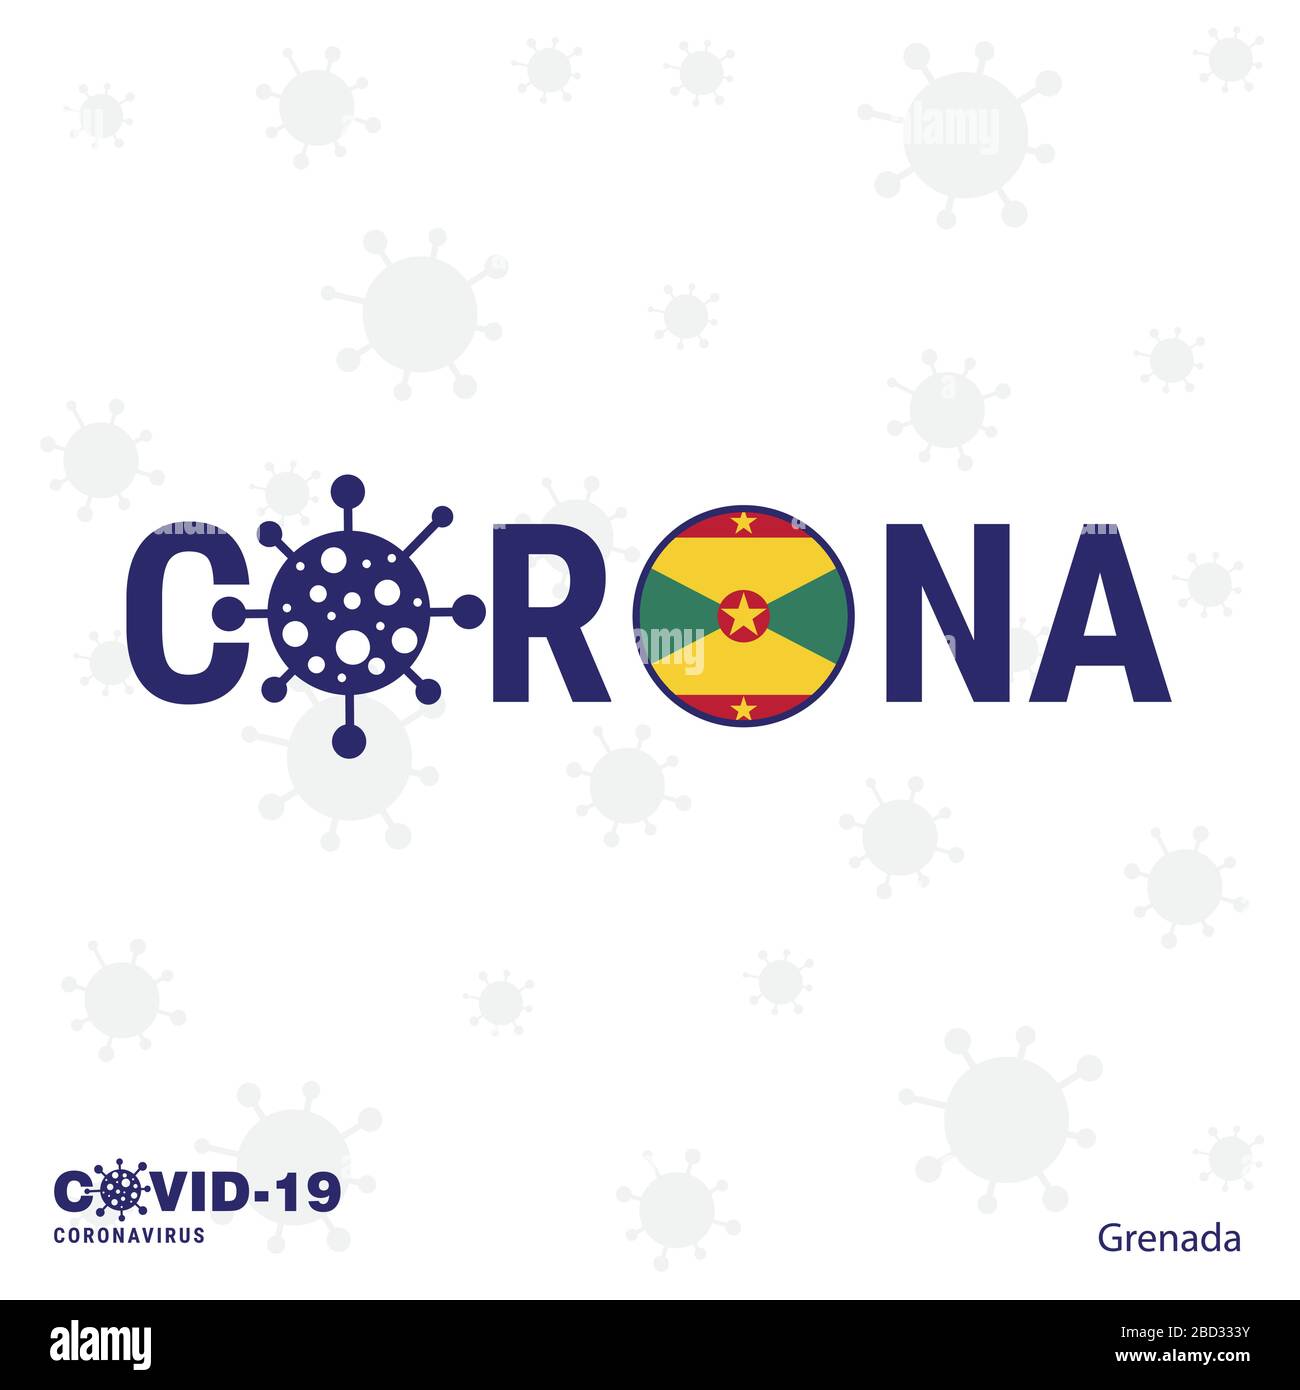 Grenada Coronavirus Typography. COVID-19 country banner. Stay home, Stay Healthy. Take care of your own health Stock Vector